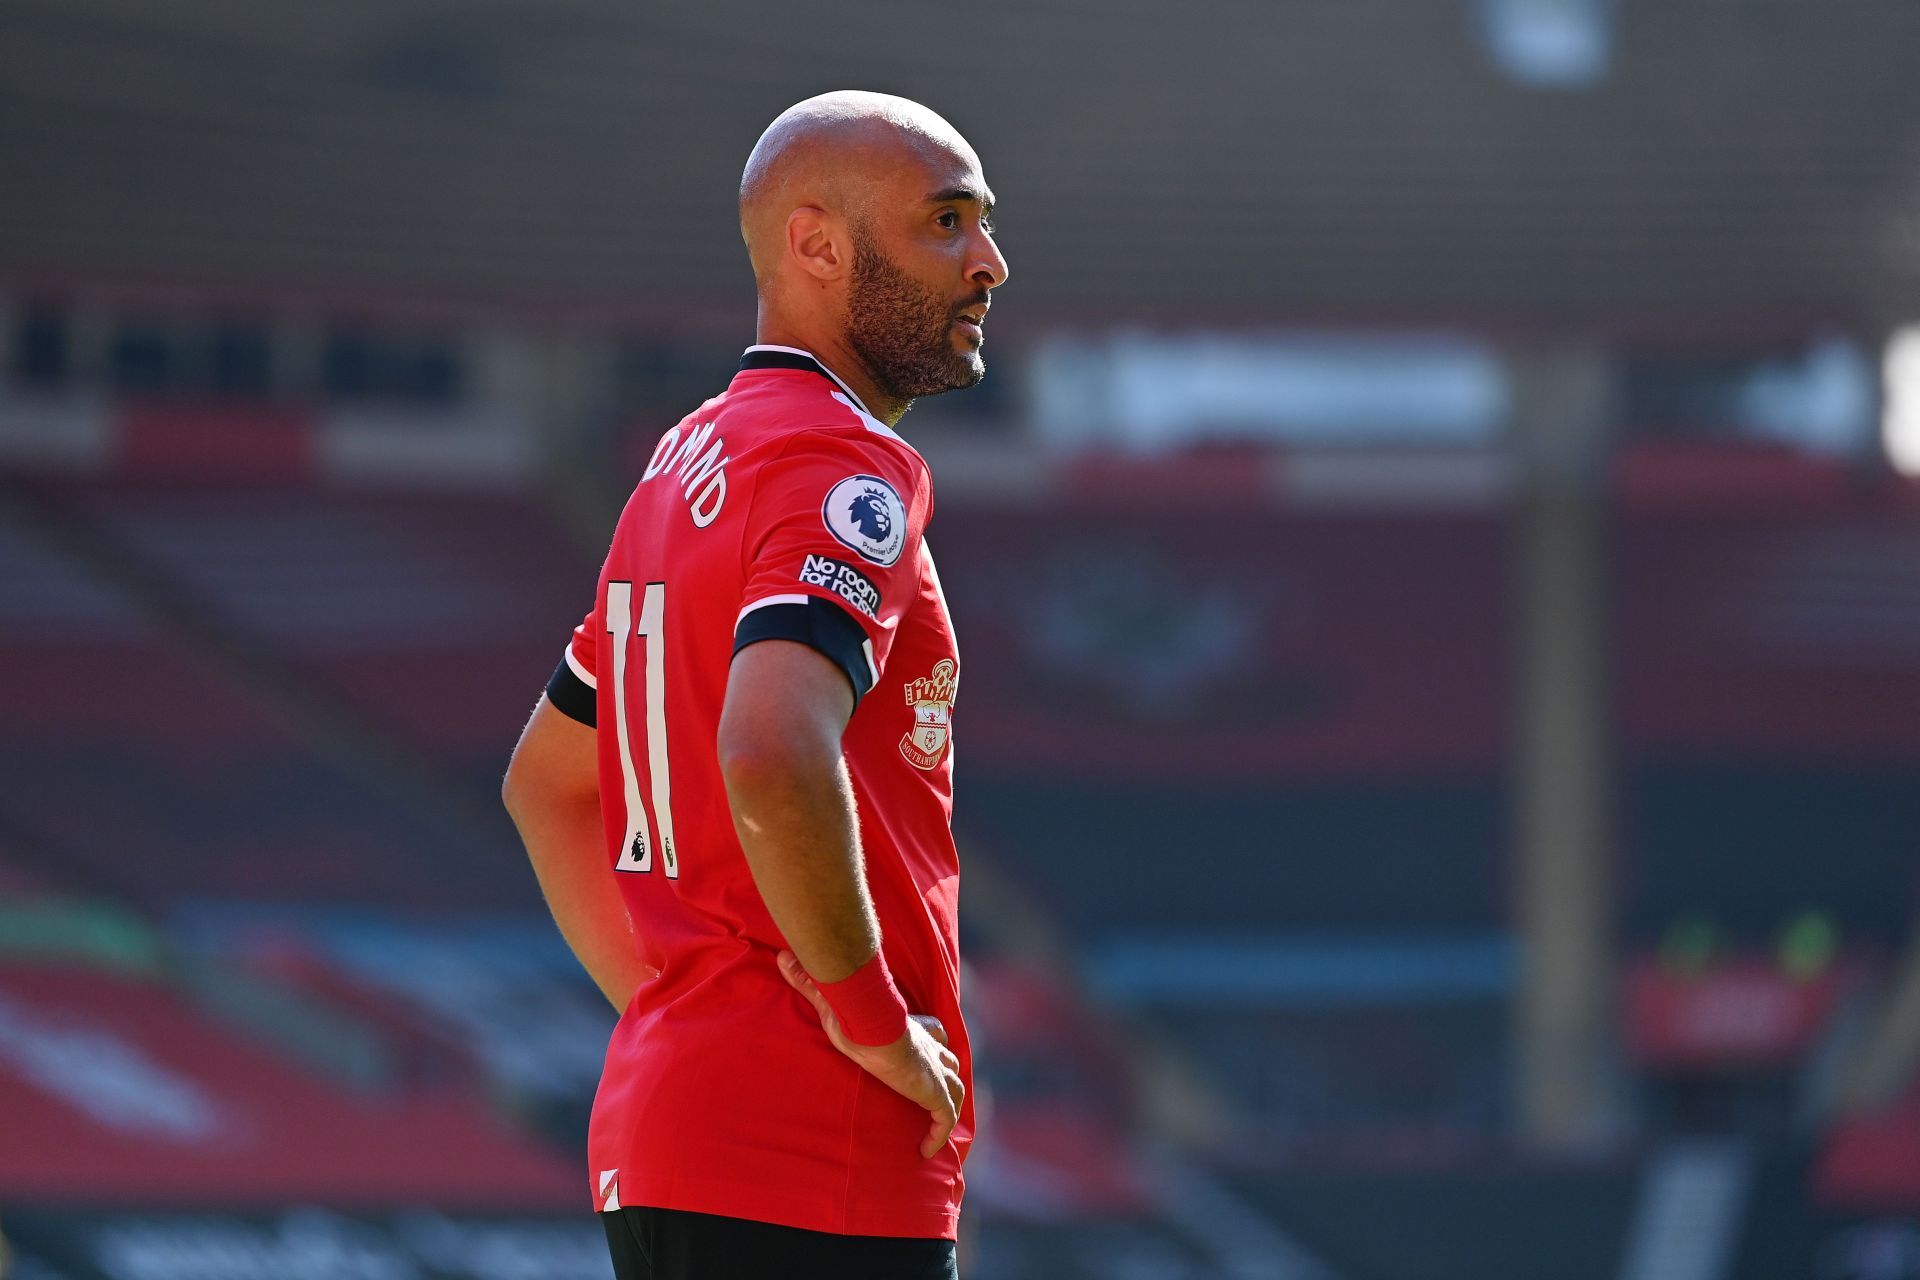 Nathan Redmond has provided the most assists for Southampton this season